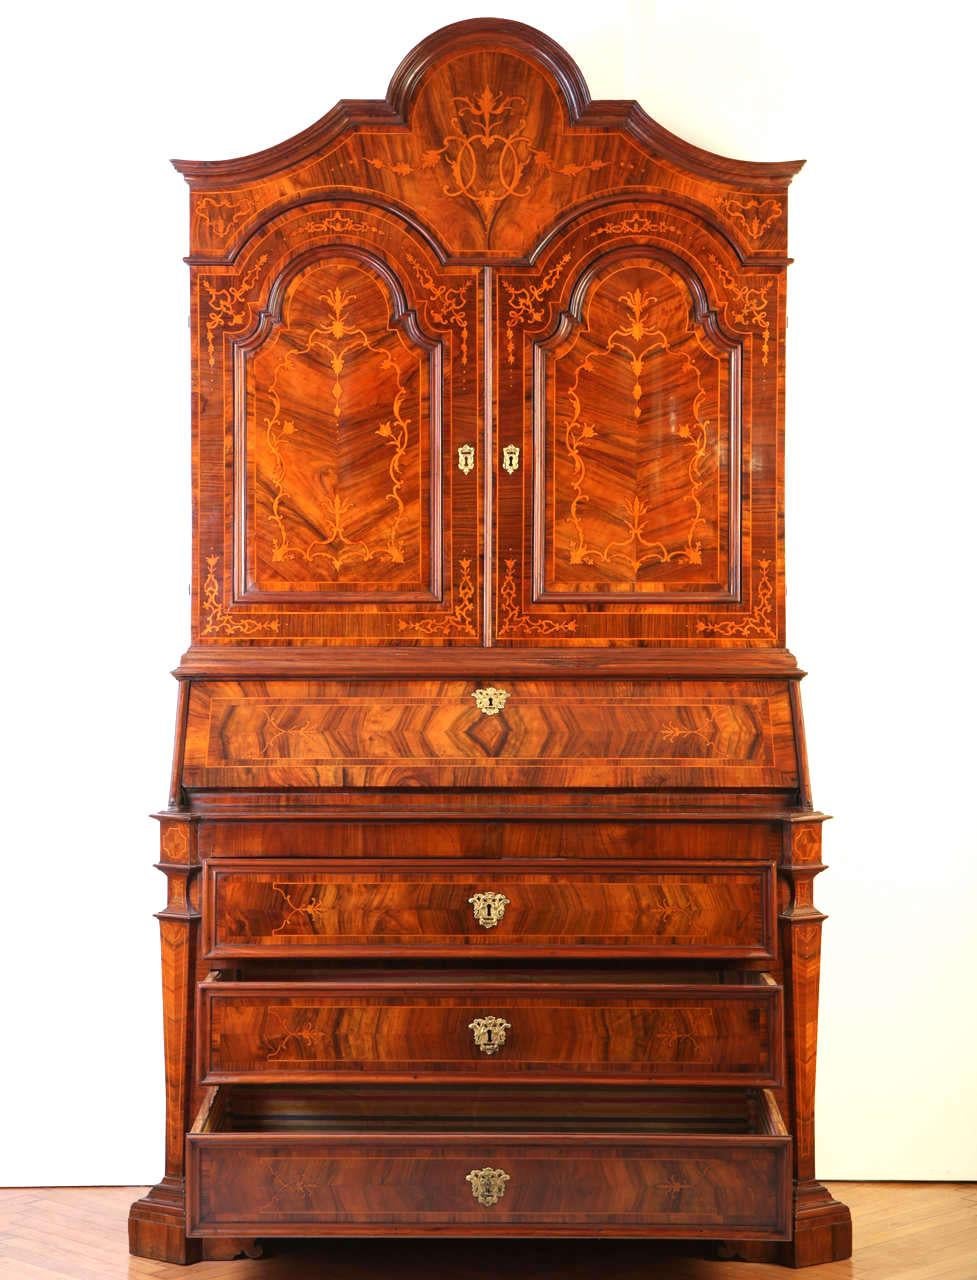 An Italian walnut, parquetry bureau cabinet fruitwood inlaid with scrolling foliage,
The upper section with a shaped carved cresting, a shaped doors opening to reveal three shelves, the lower section with a sloping-front,
Opening to reveal a